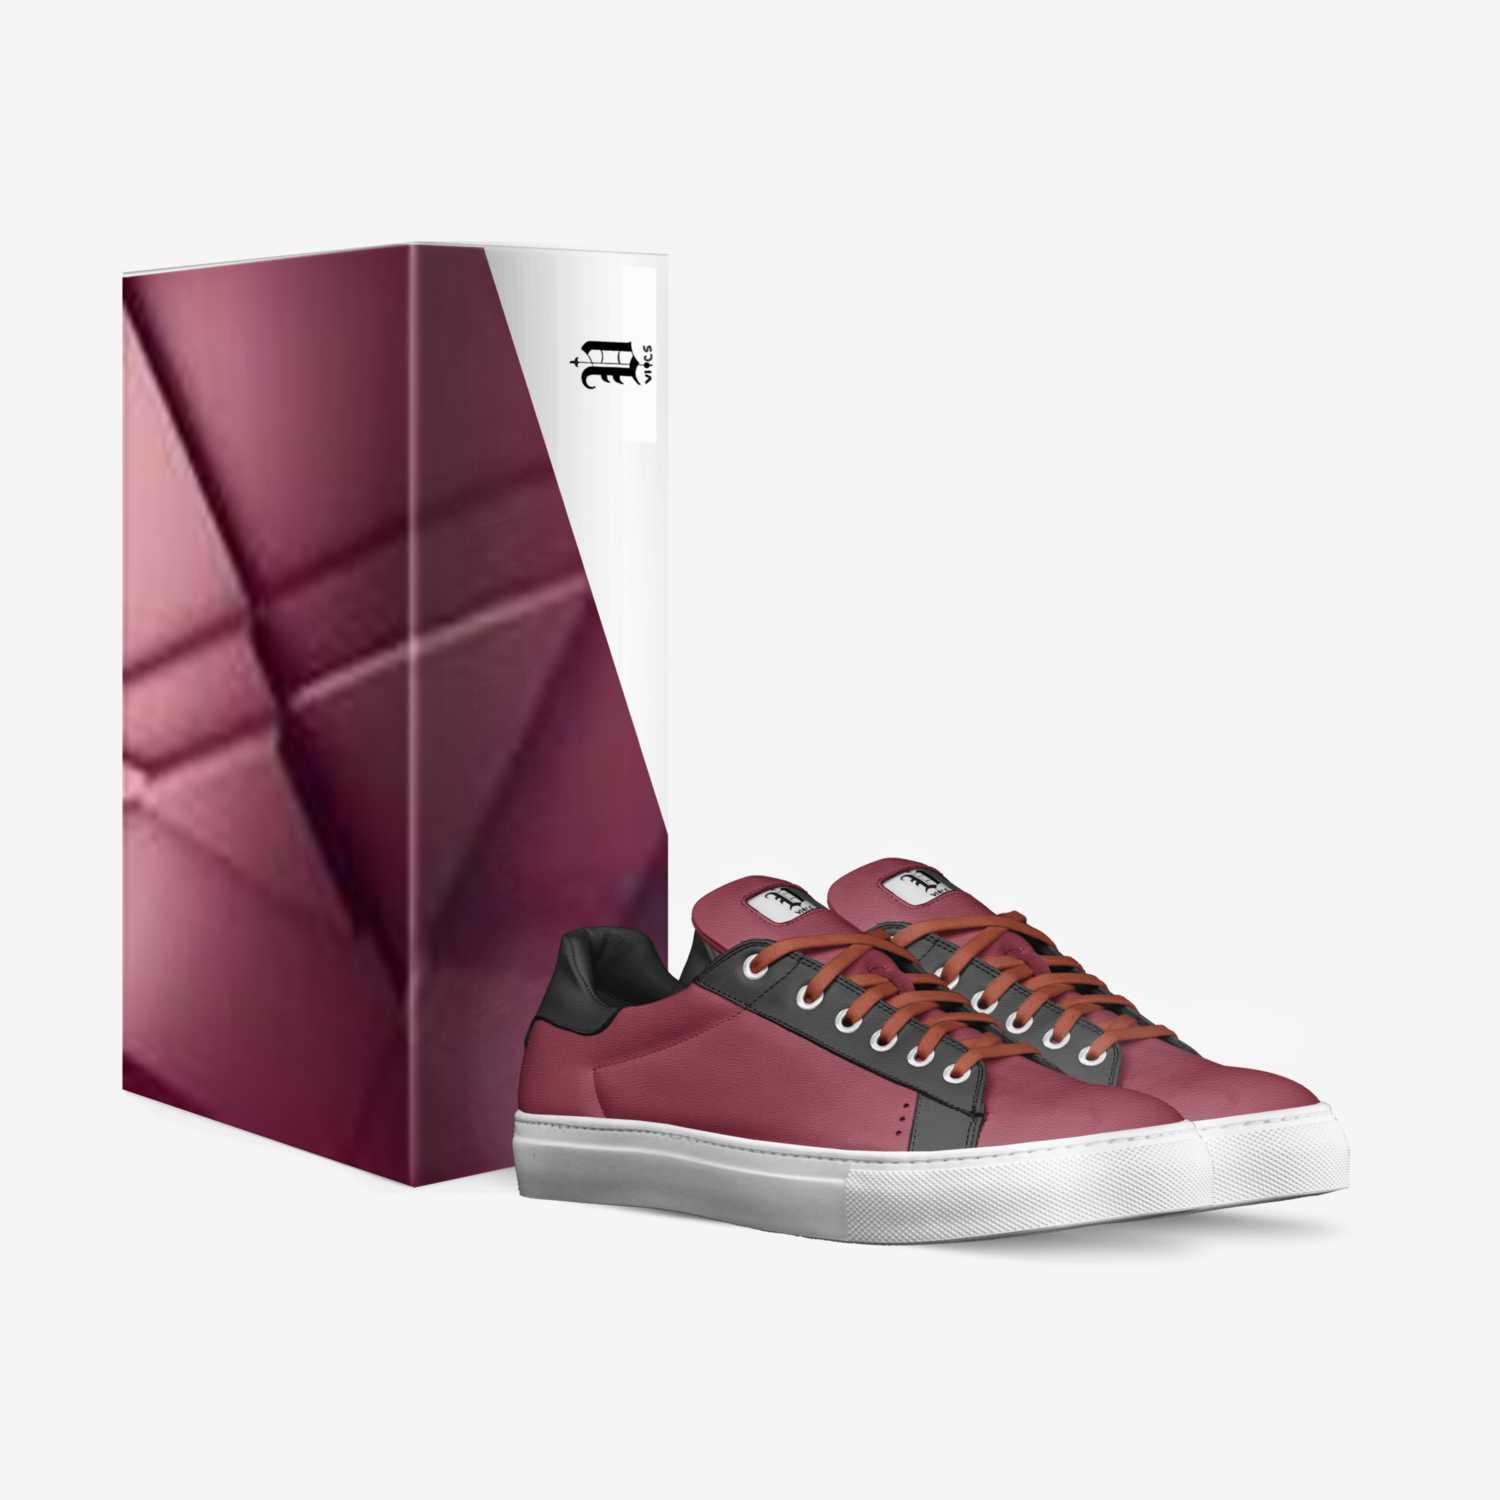 Vics maroon 2 custom made in Italy shoes by Brayden Murphy | Box view